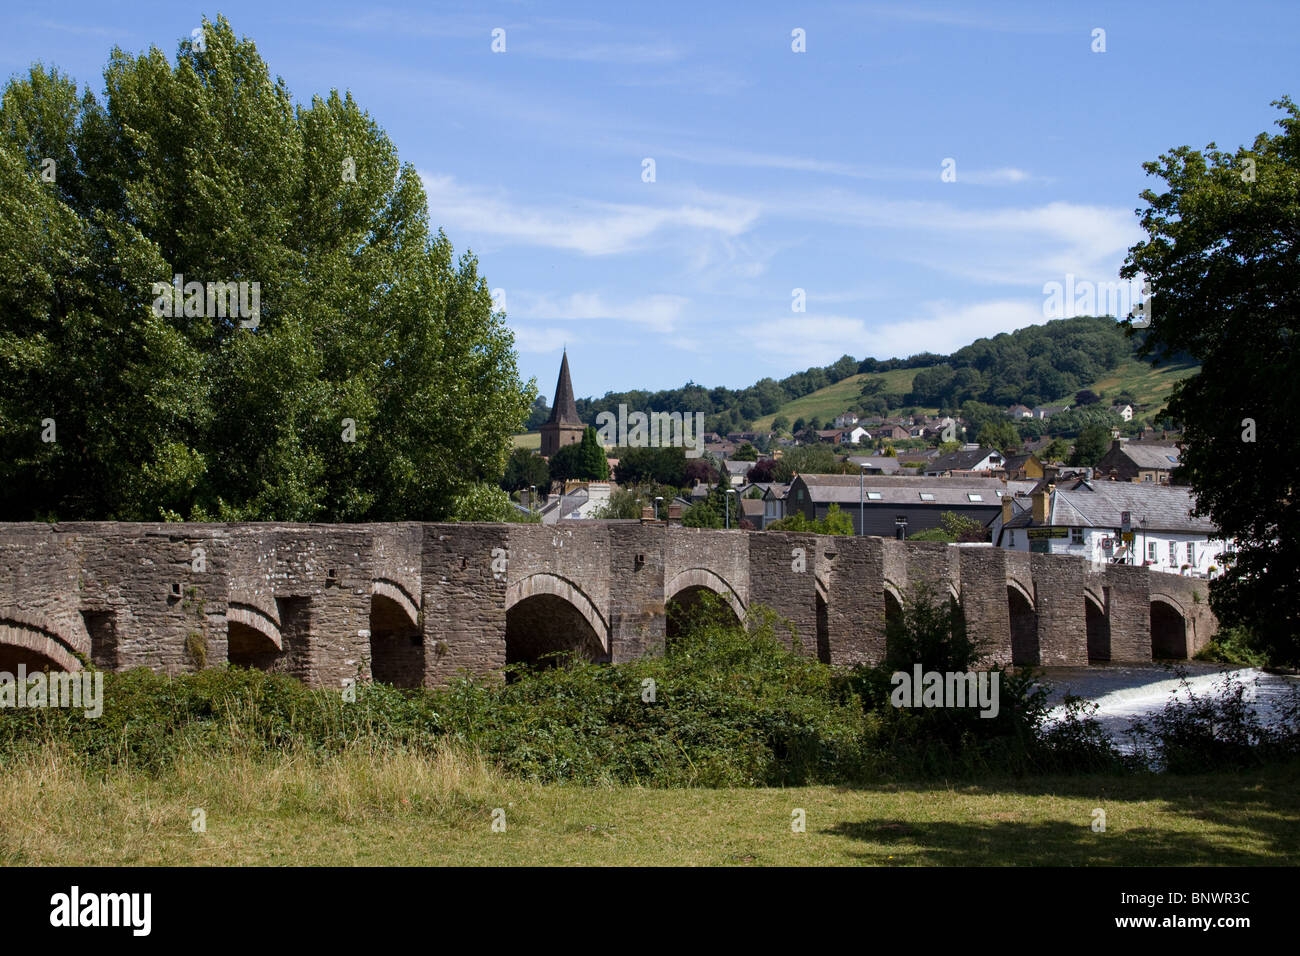 Landscape view of Crickhowell Bridge in Wales on sunny day Stock Photo